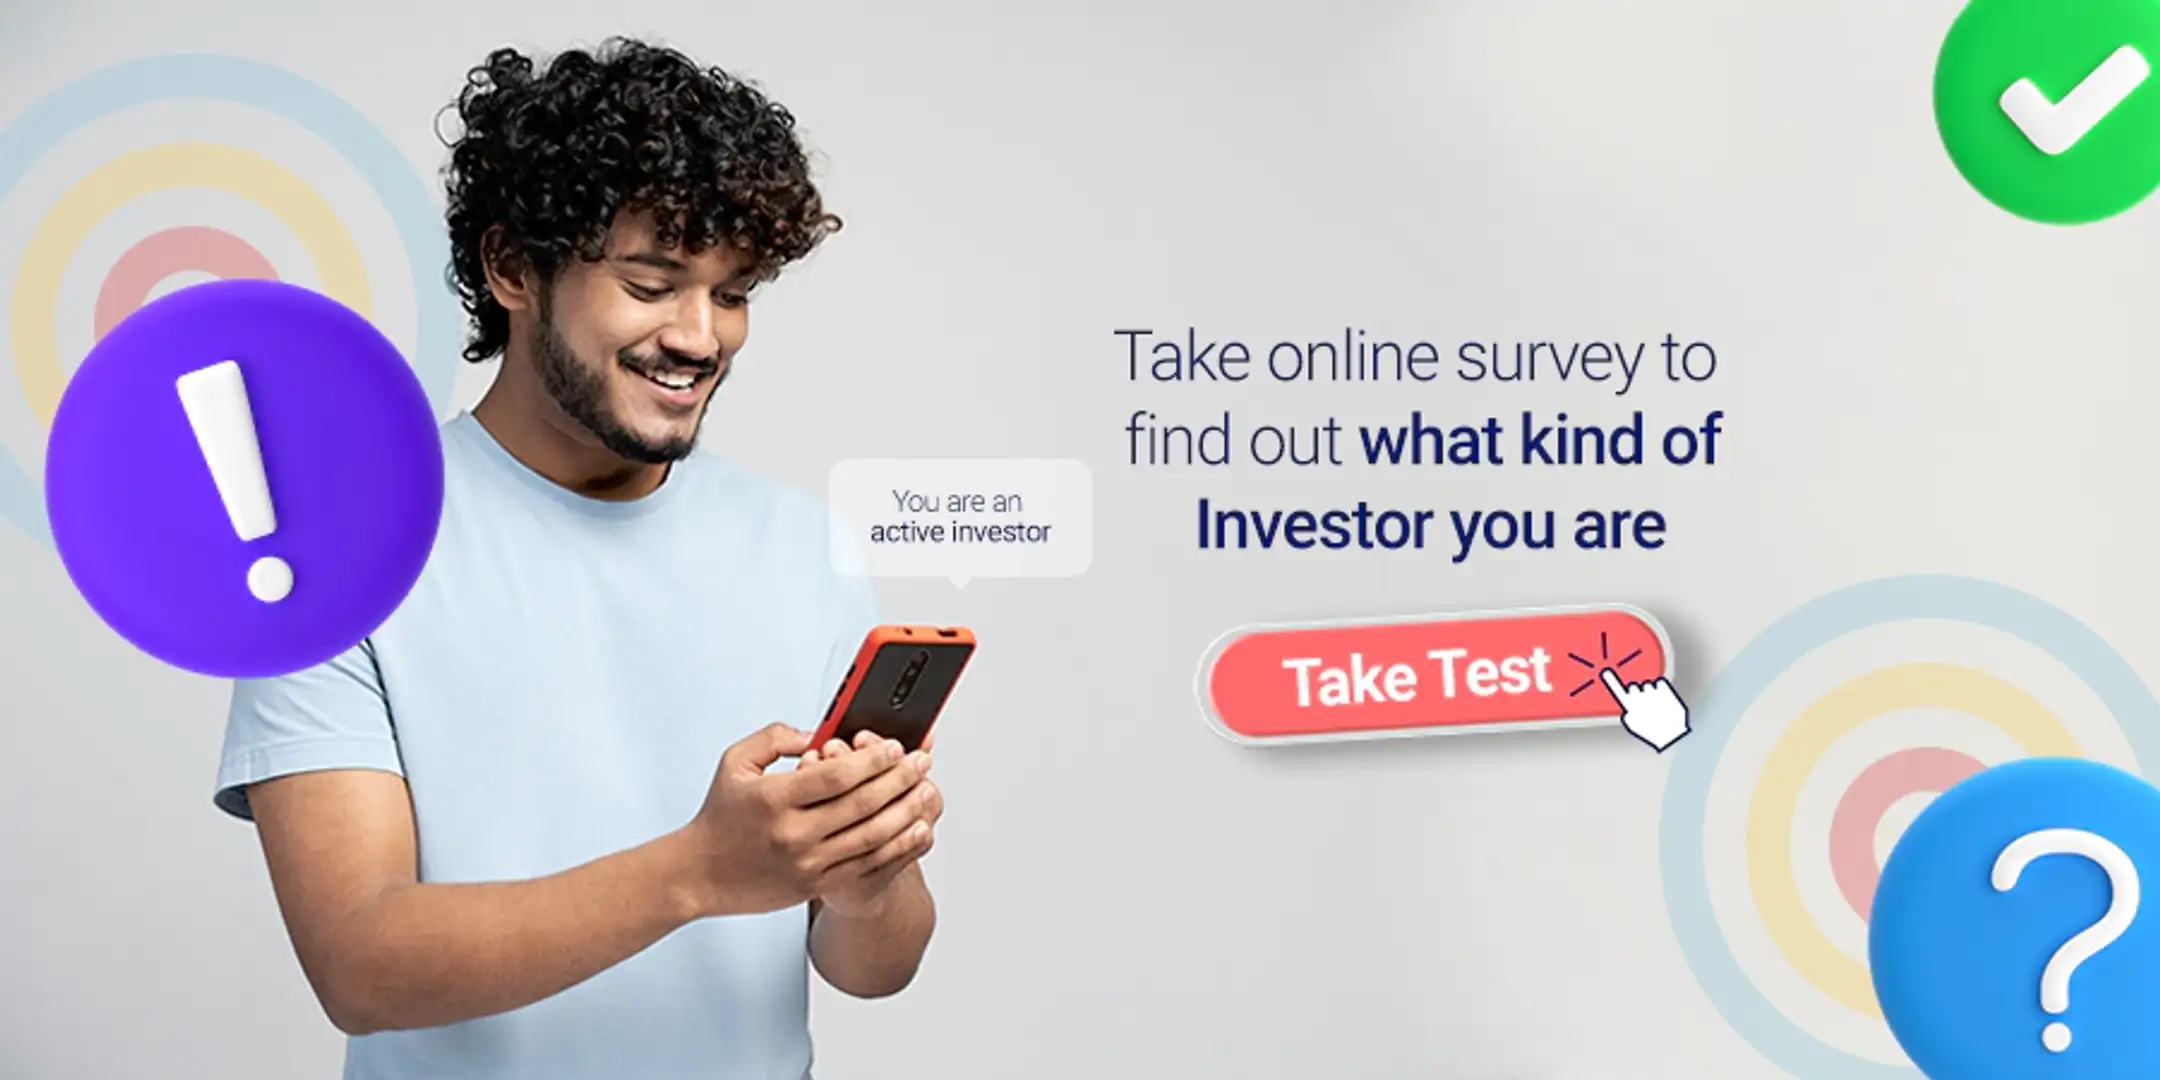 Talk to a Financial Advisor in UAE and find out what type of investor are you